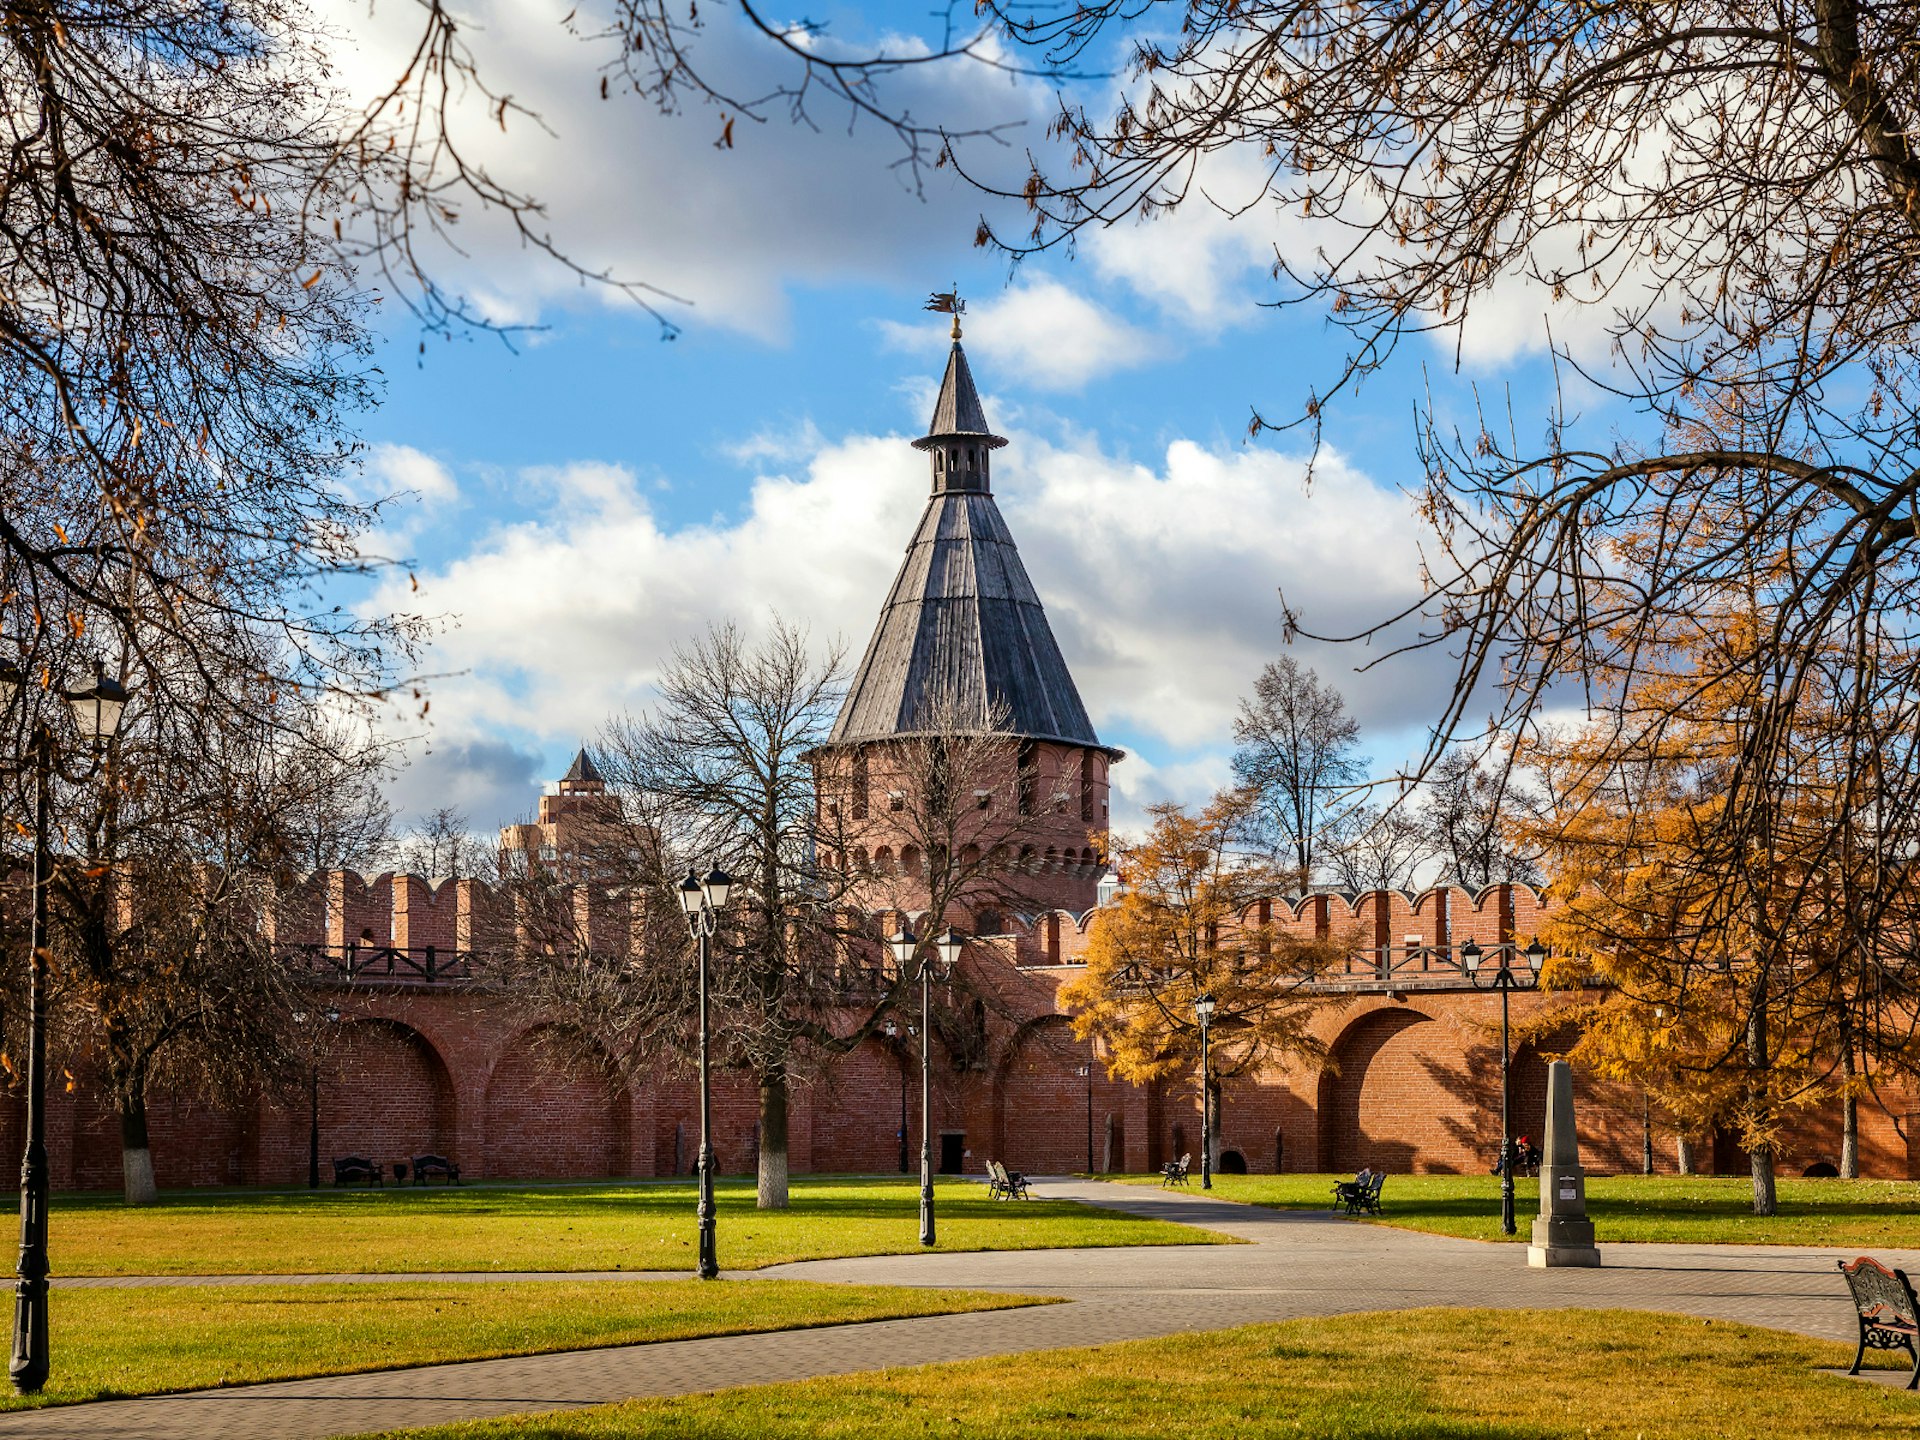 The city of Tula with its landmark 16th-century kremlin makes a great day trip from Moscow © Soloviev Andrey / Shutterstock